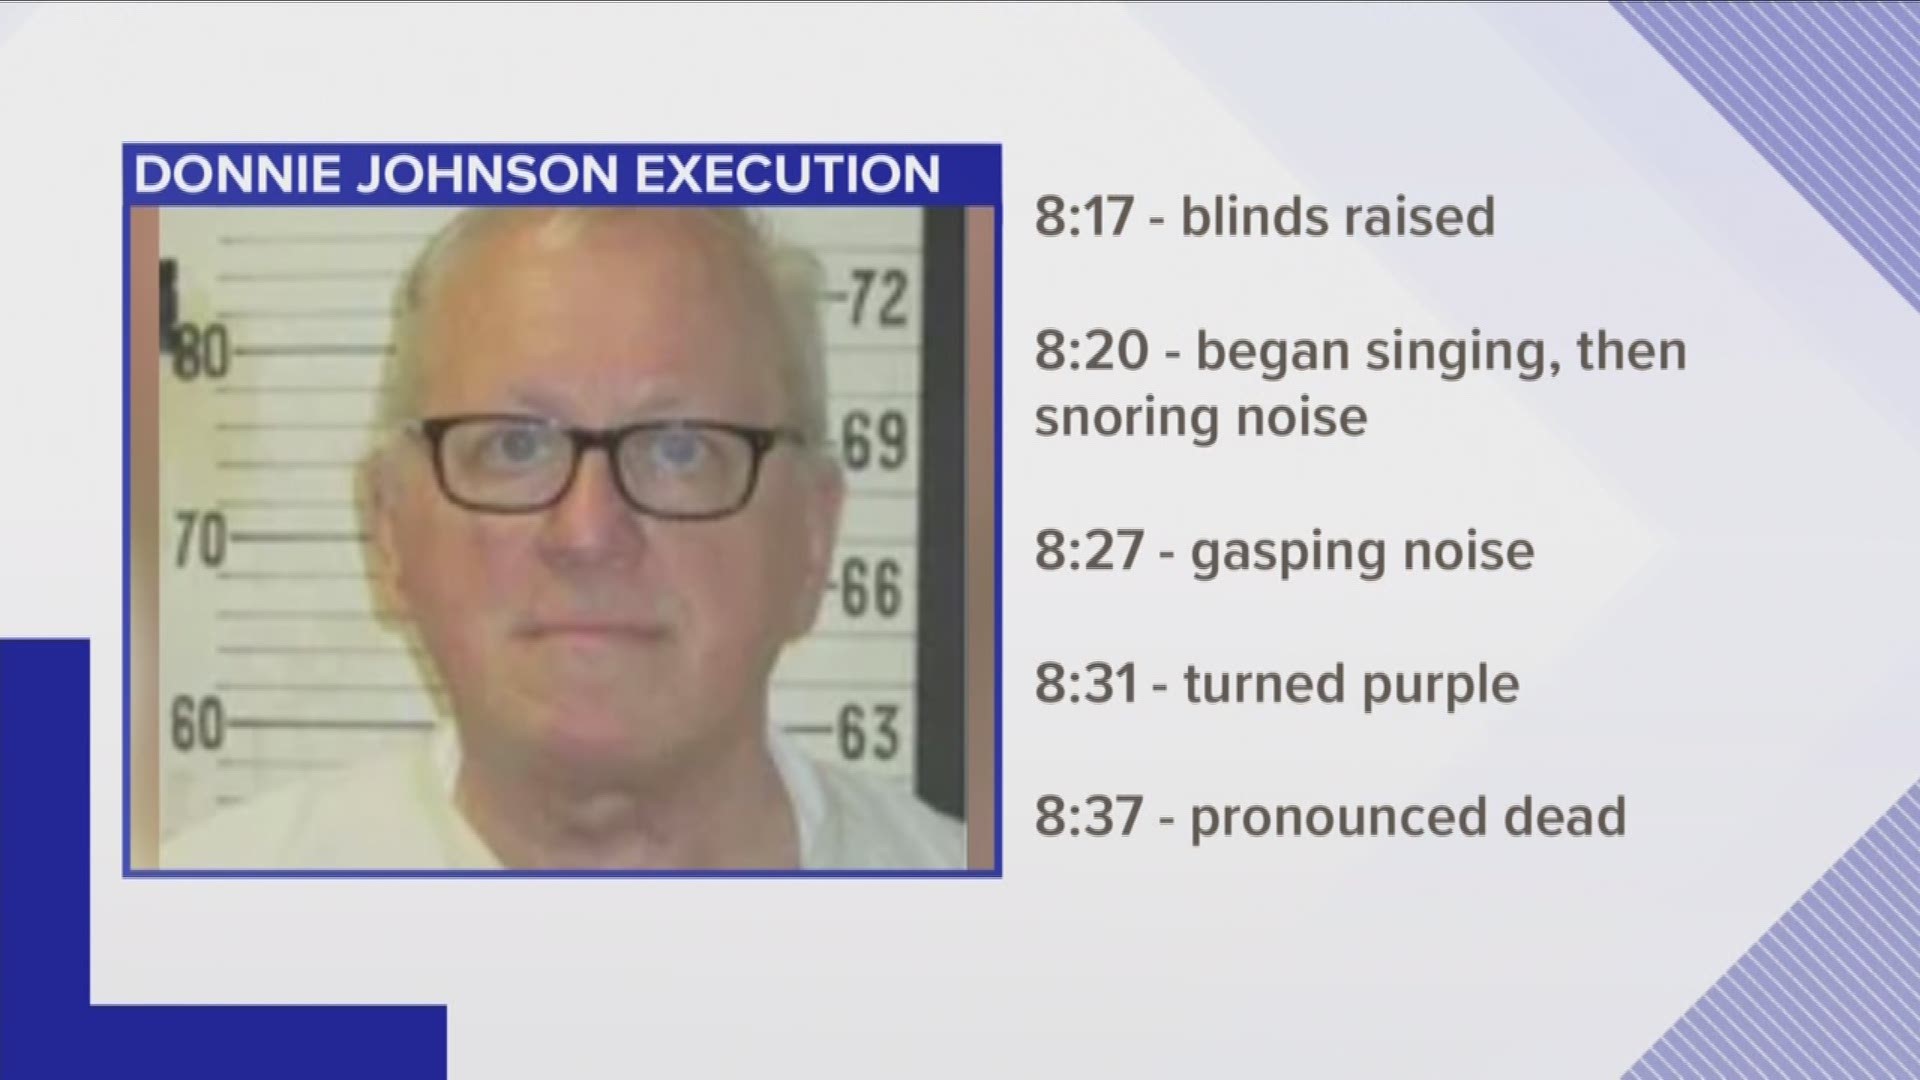 Johnson was put to death by lethal injection at the Riverbend Maximum Security Institution in Nashville. His last words before singing two hymns were 'I commend my life into your hands. Thy will be done. In Jesus' name I pray, amen.'